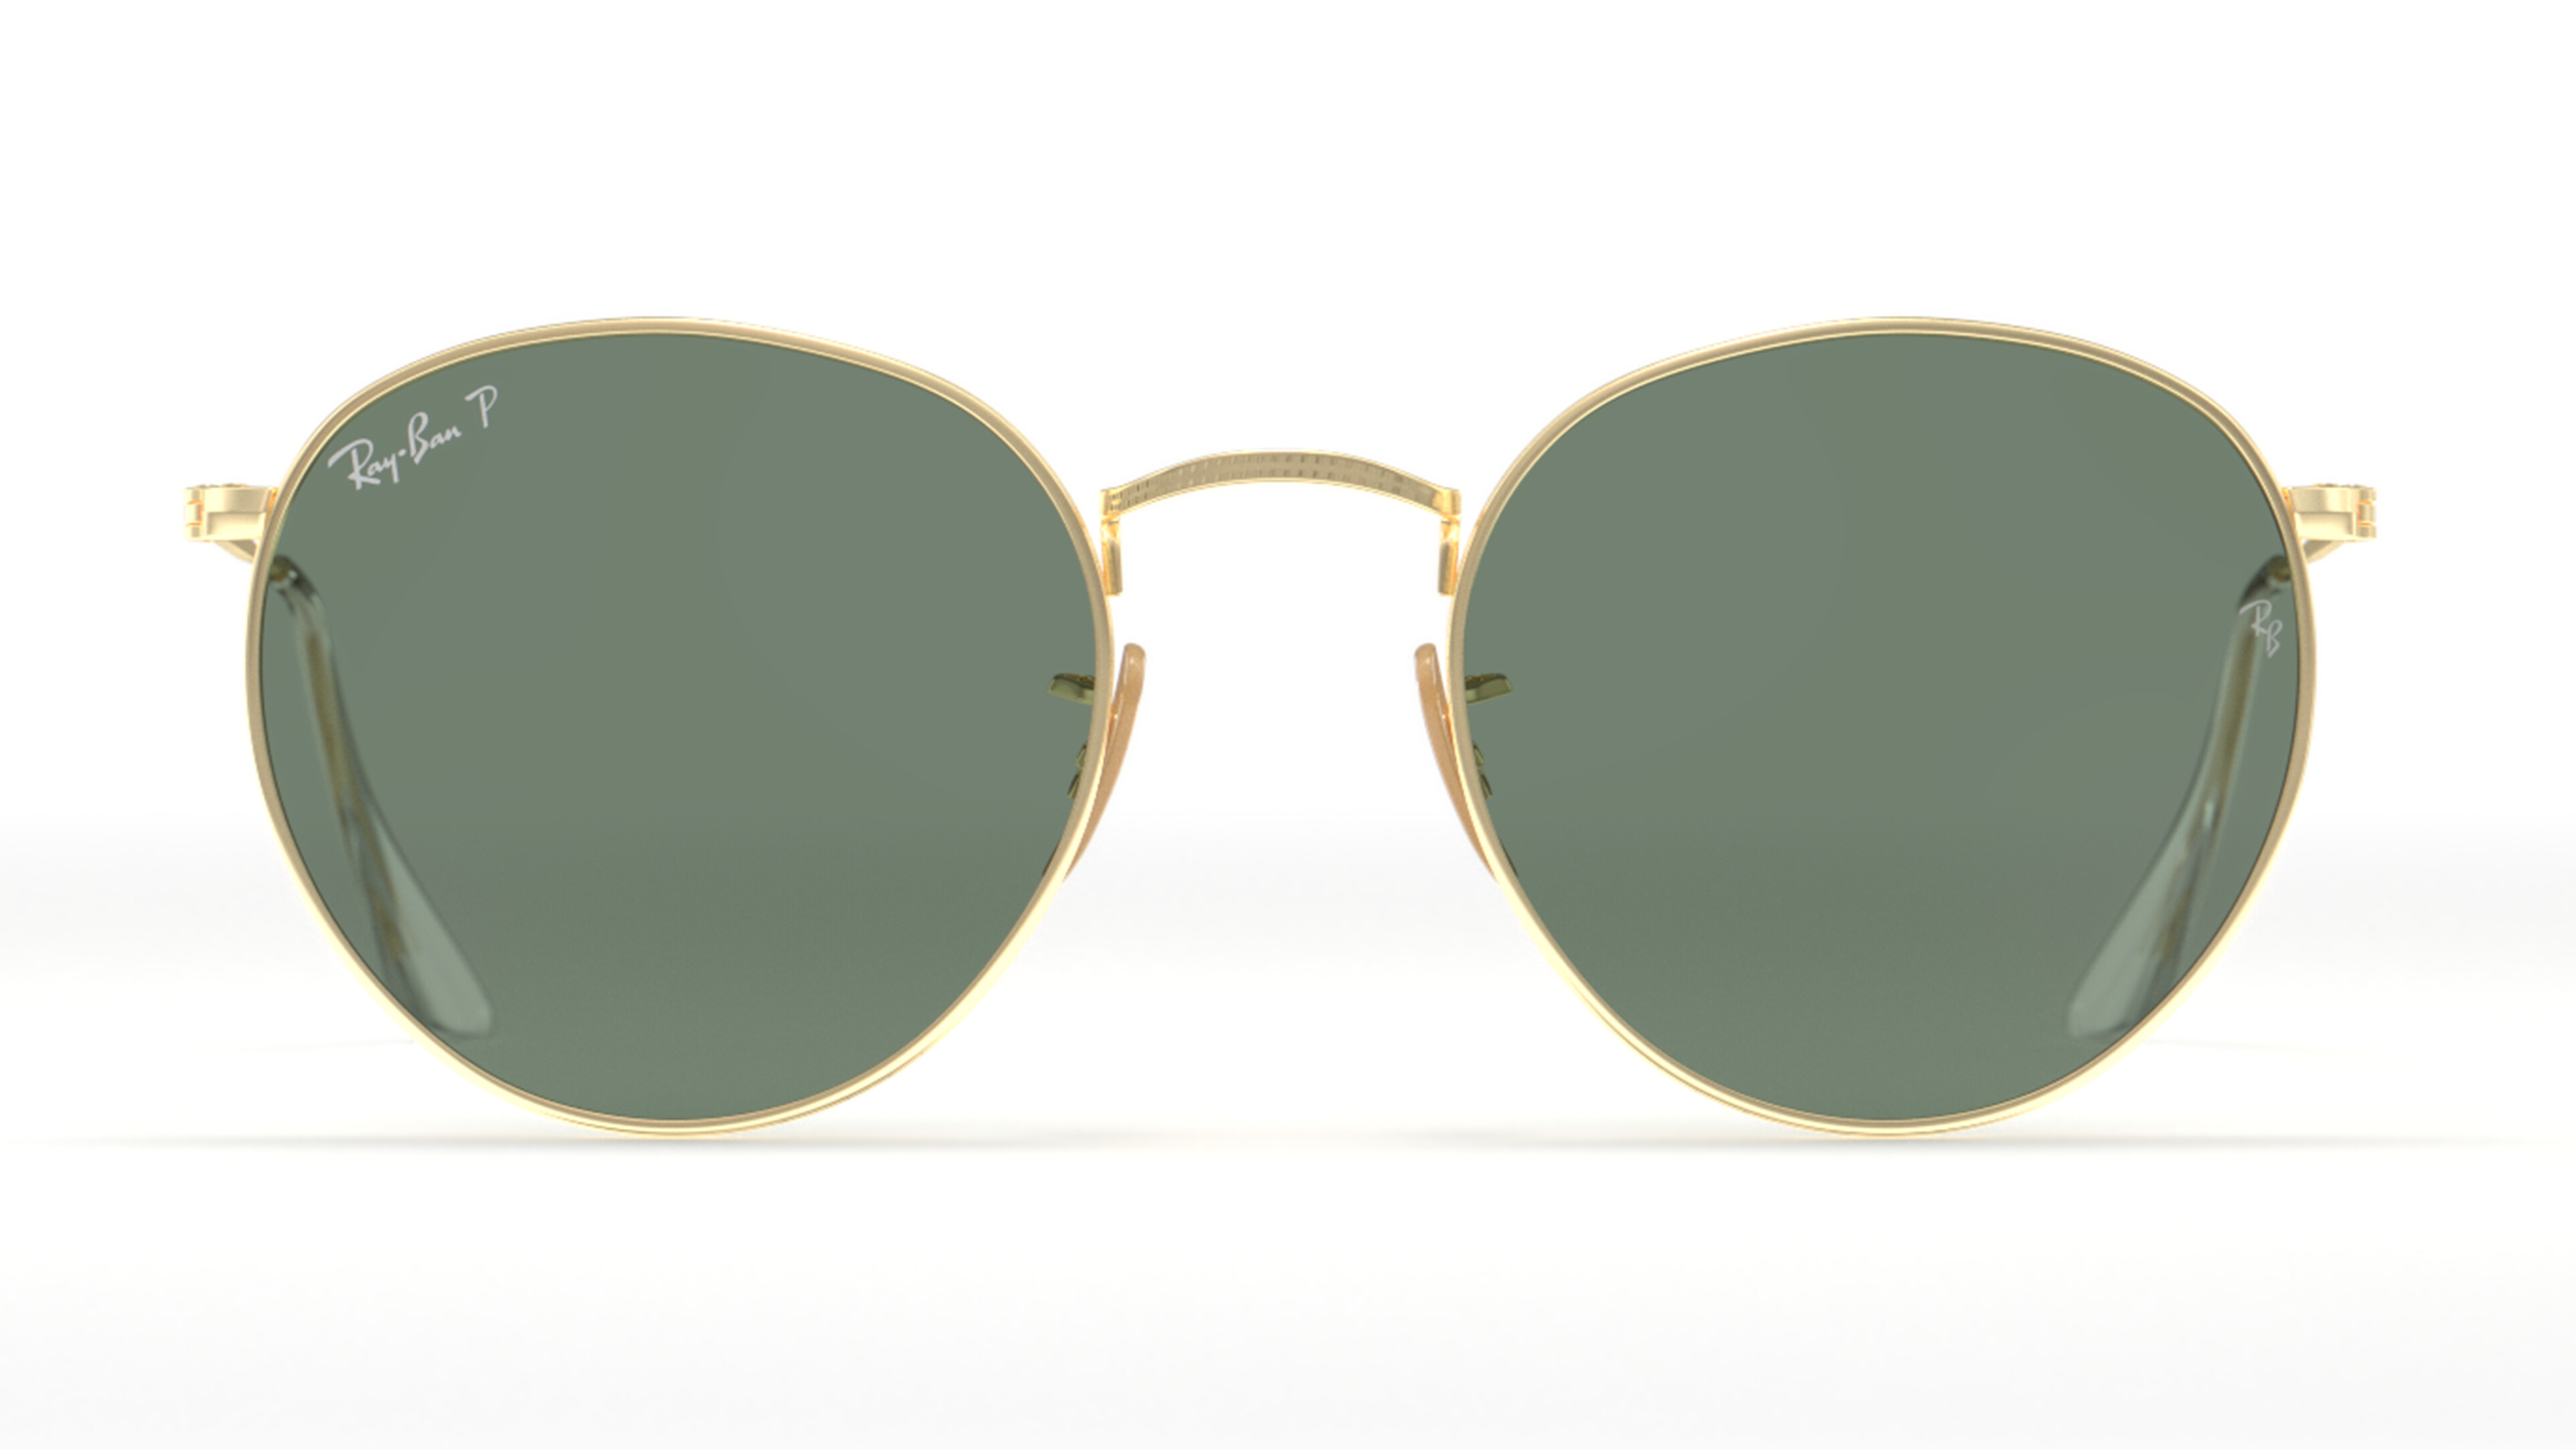 [products.image.front] Ray-Ban ROUND METAL 0RB3447 001/58 Sonnenbrille